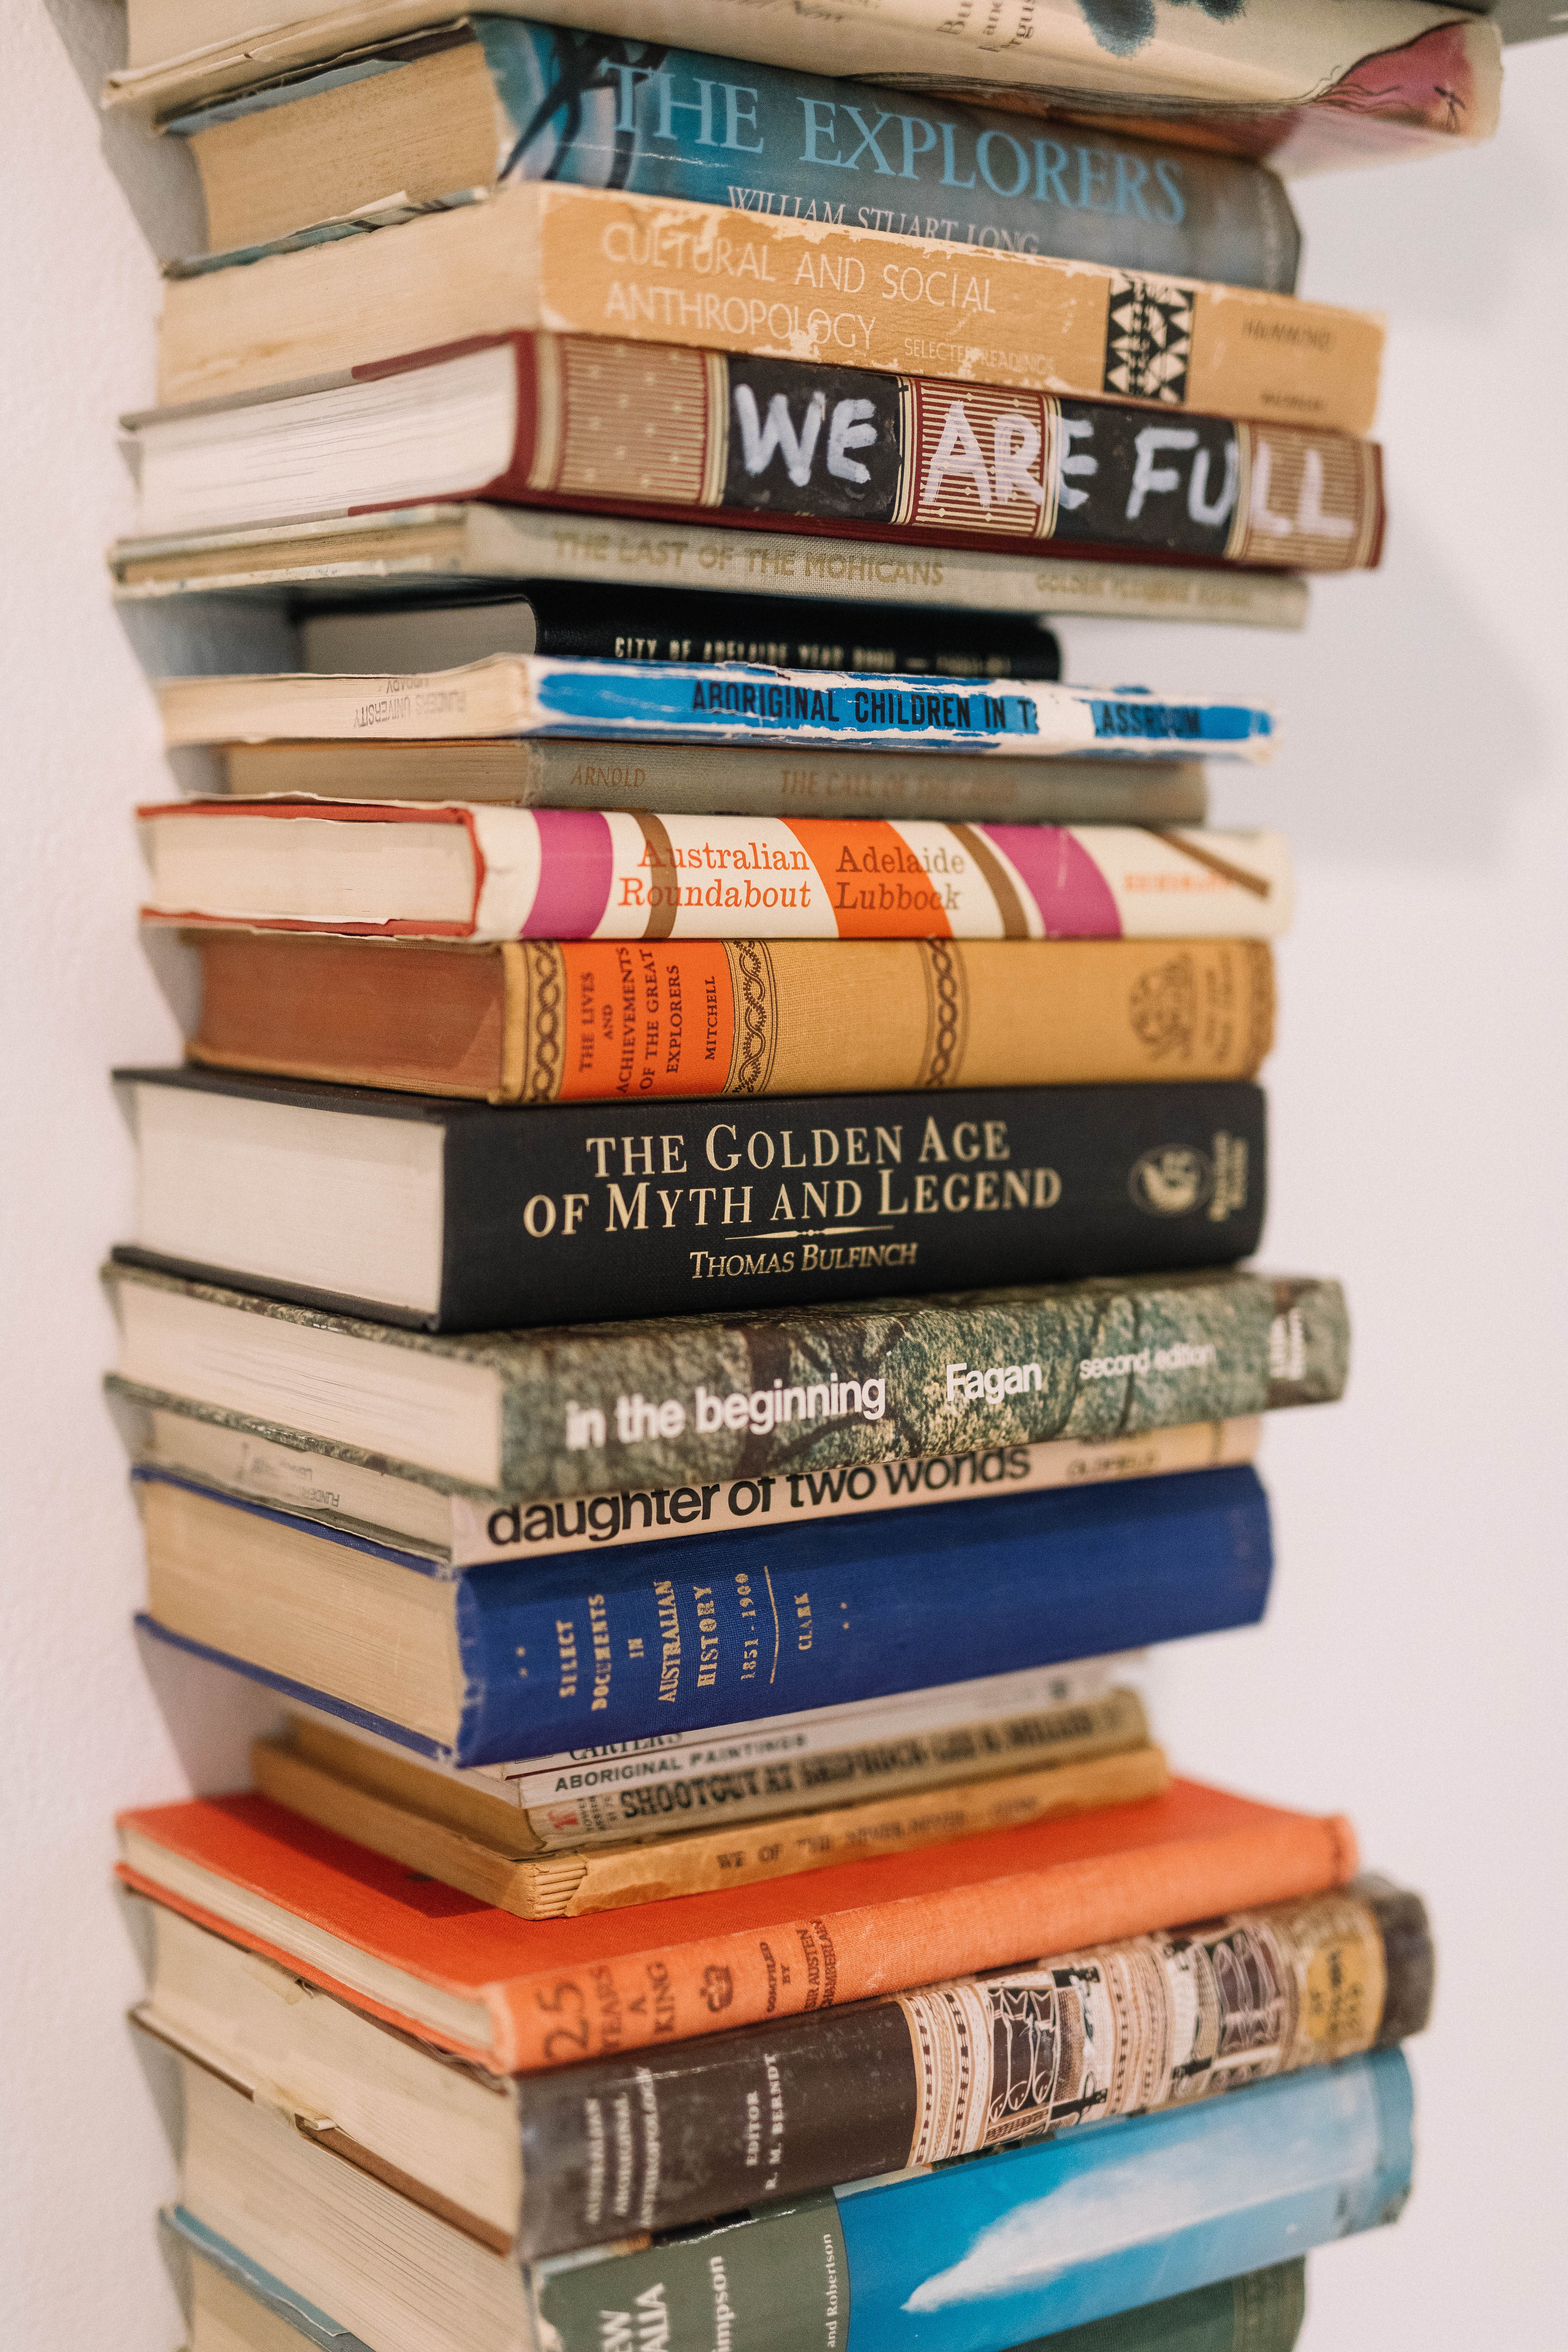 Detail of a sculpture of a tall stack of books, spines facing us with various titles.